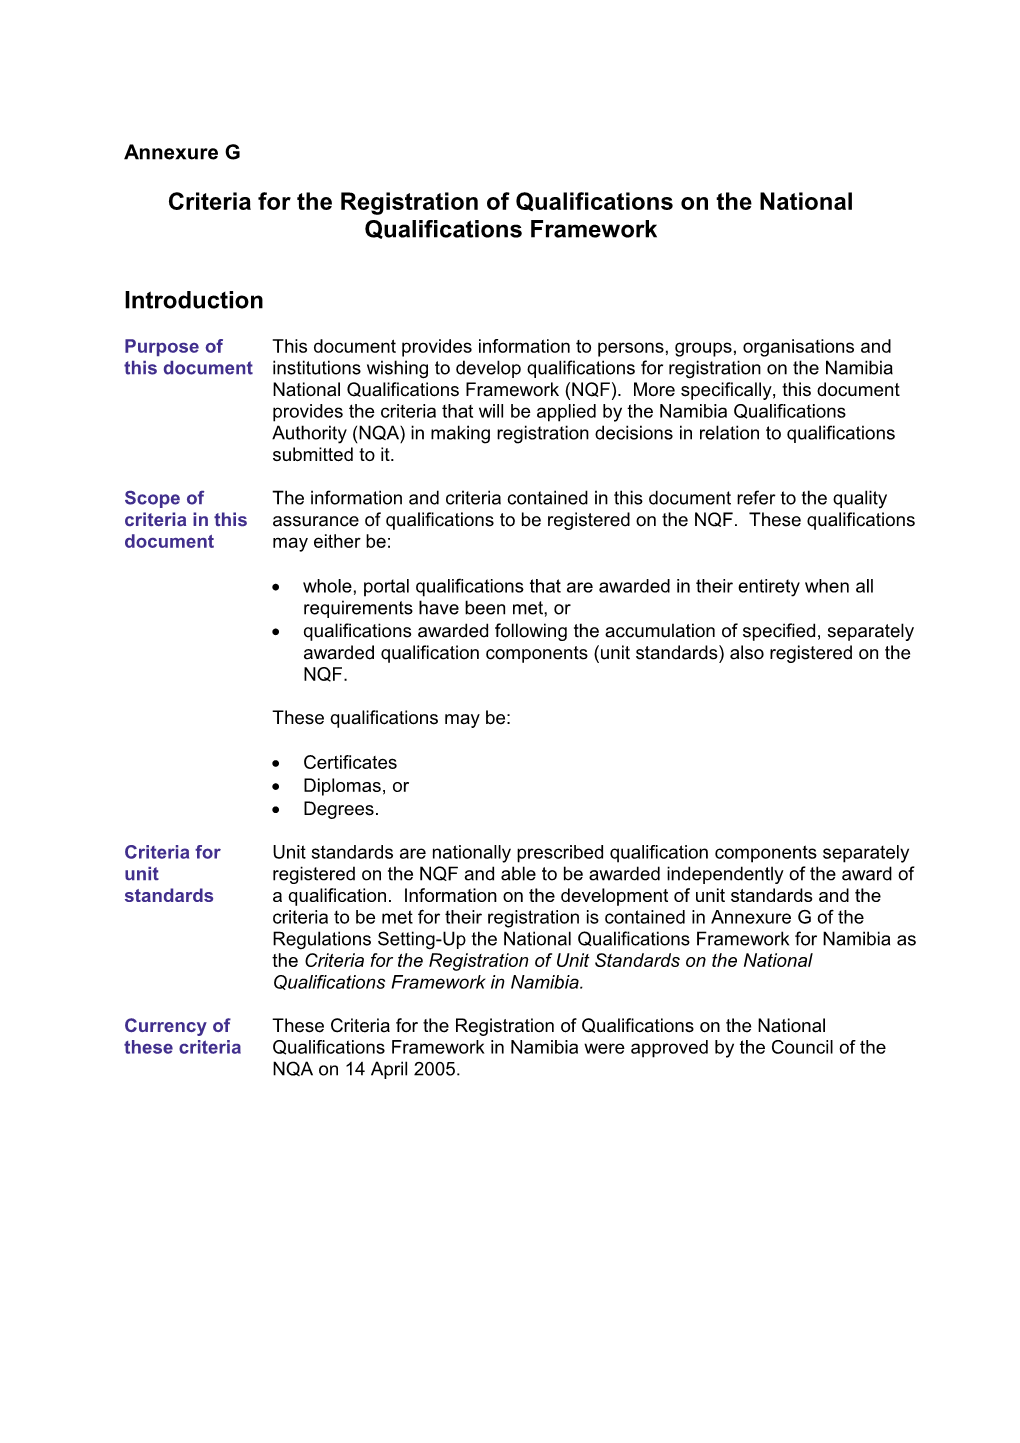 Criteria for the Registration of Qualifications on the National Qualifications Framework